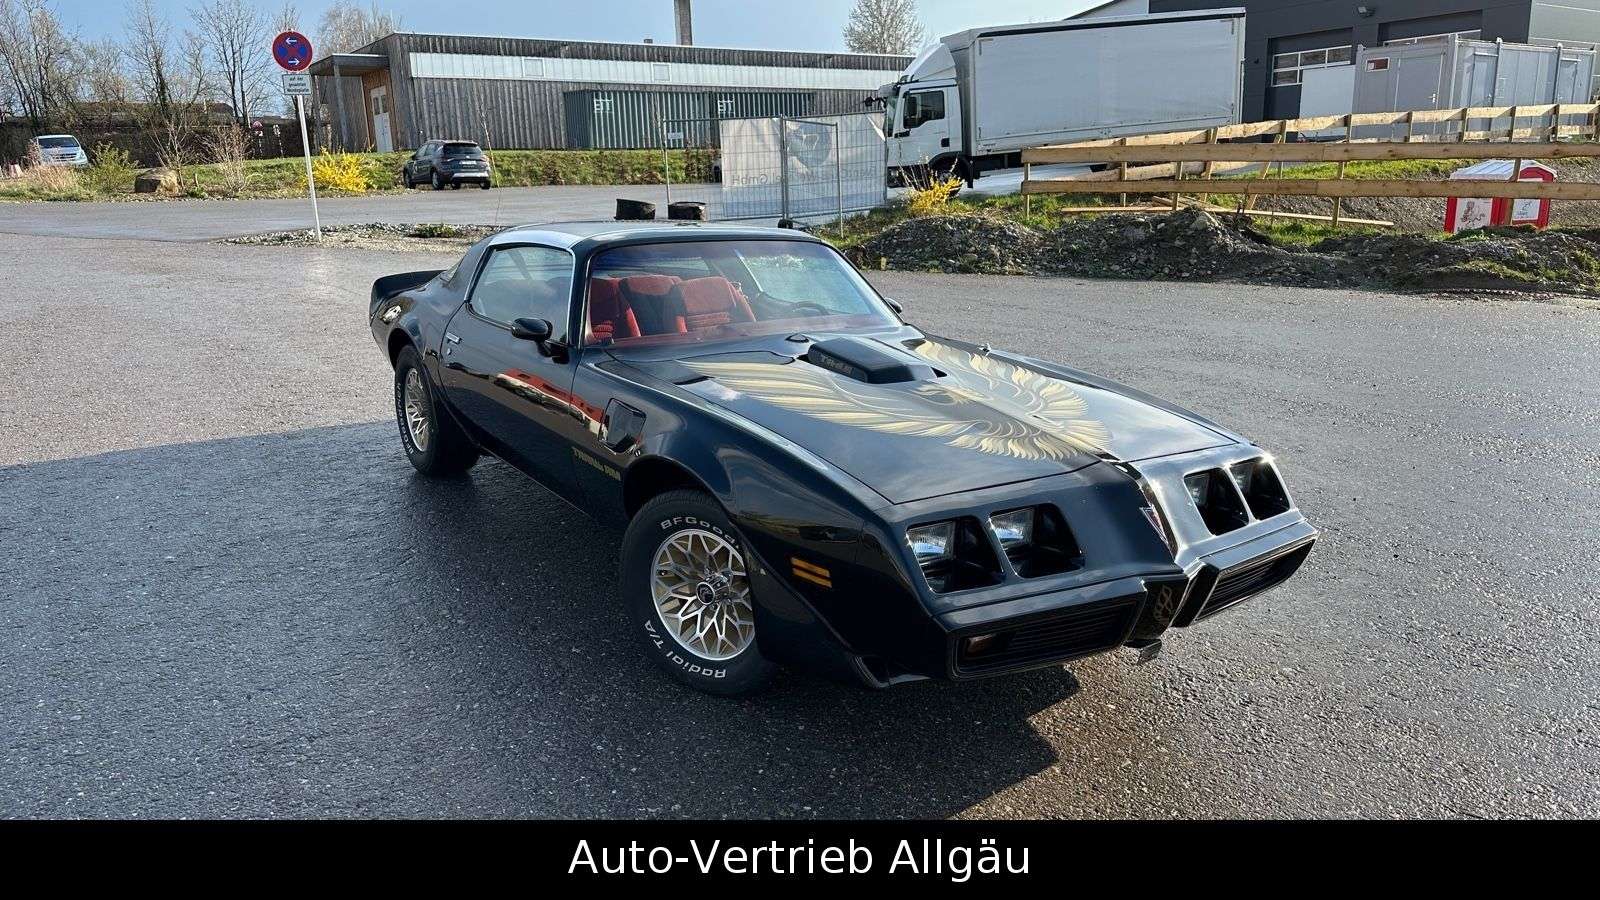 Pontiac Trans Am Coupe in Black used in Kempten (Allgäu) for € 29,900.-